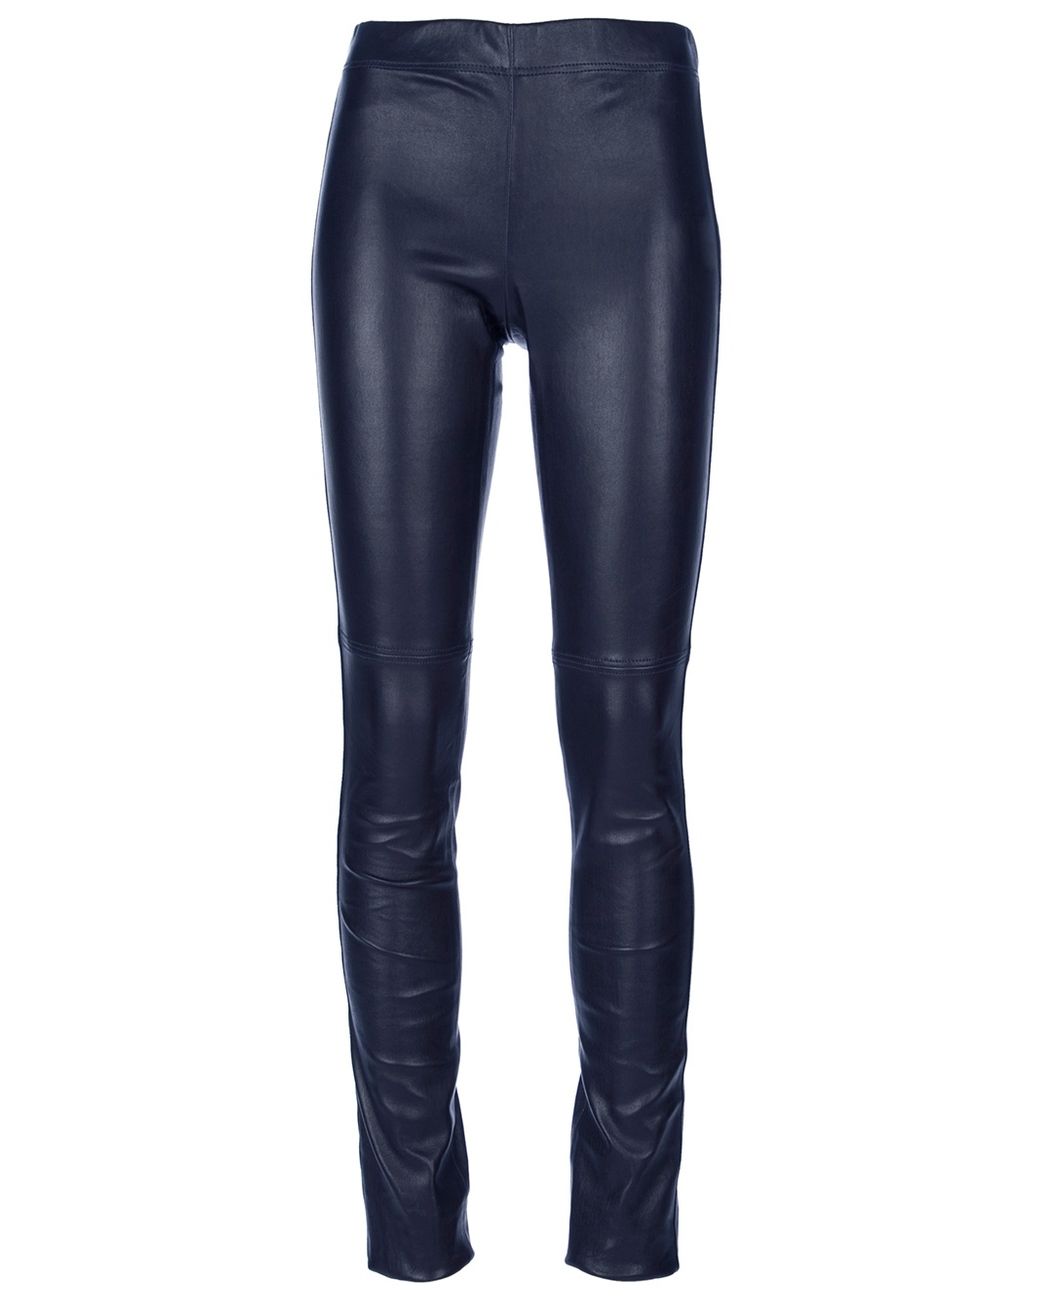 AFRM Heston high rise straight leg faux leather pants in blue  part of a  set  ASOS